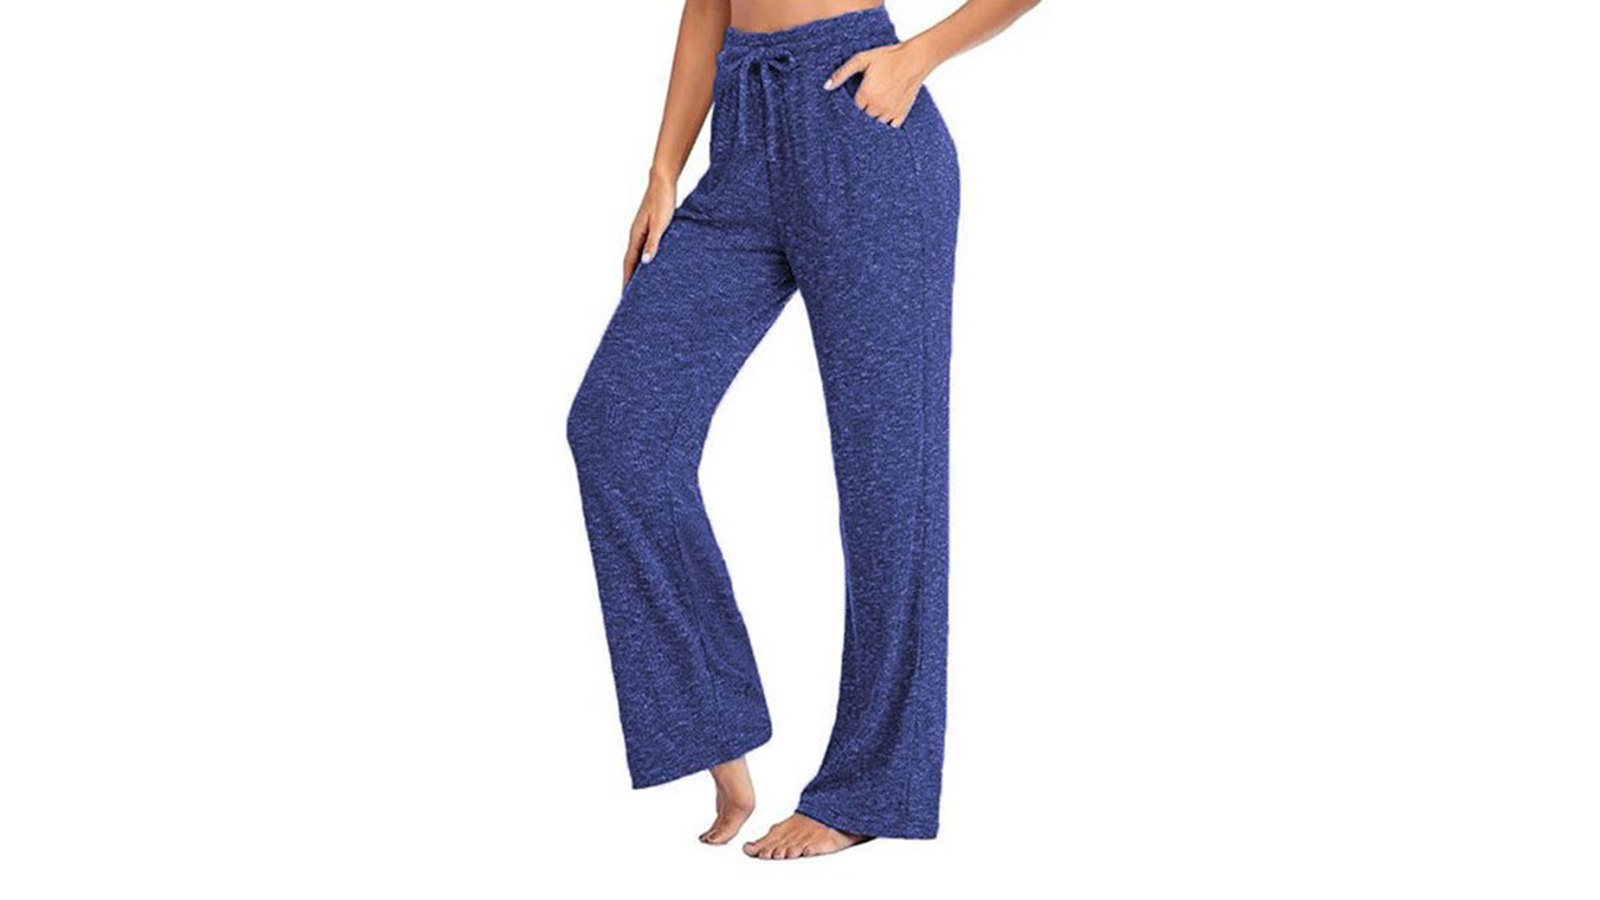 Vning Lounge Pants Are Now Under $20 in Every Color